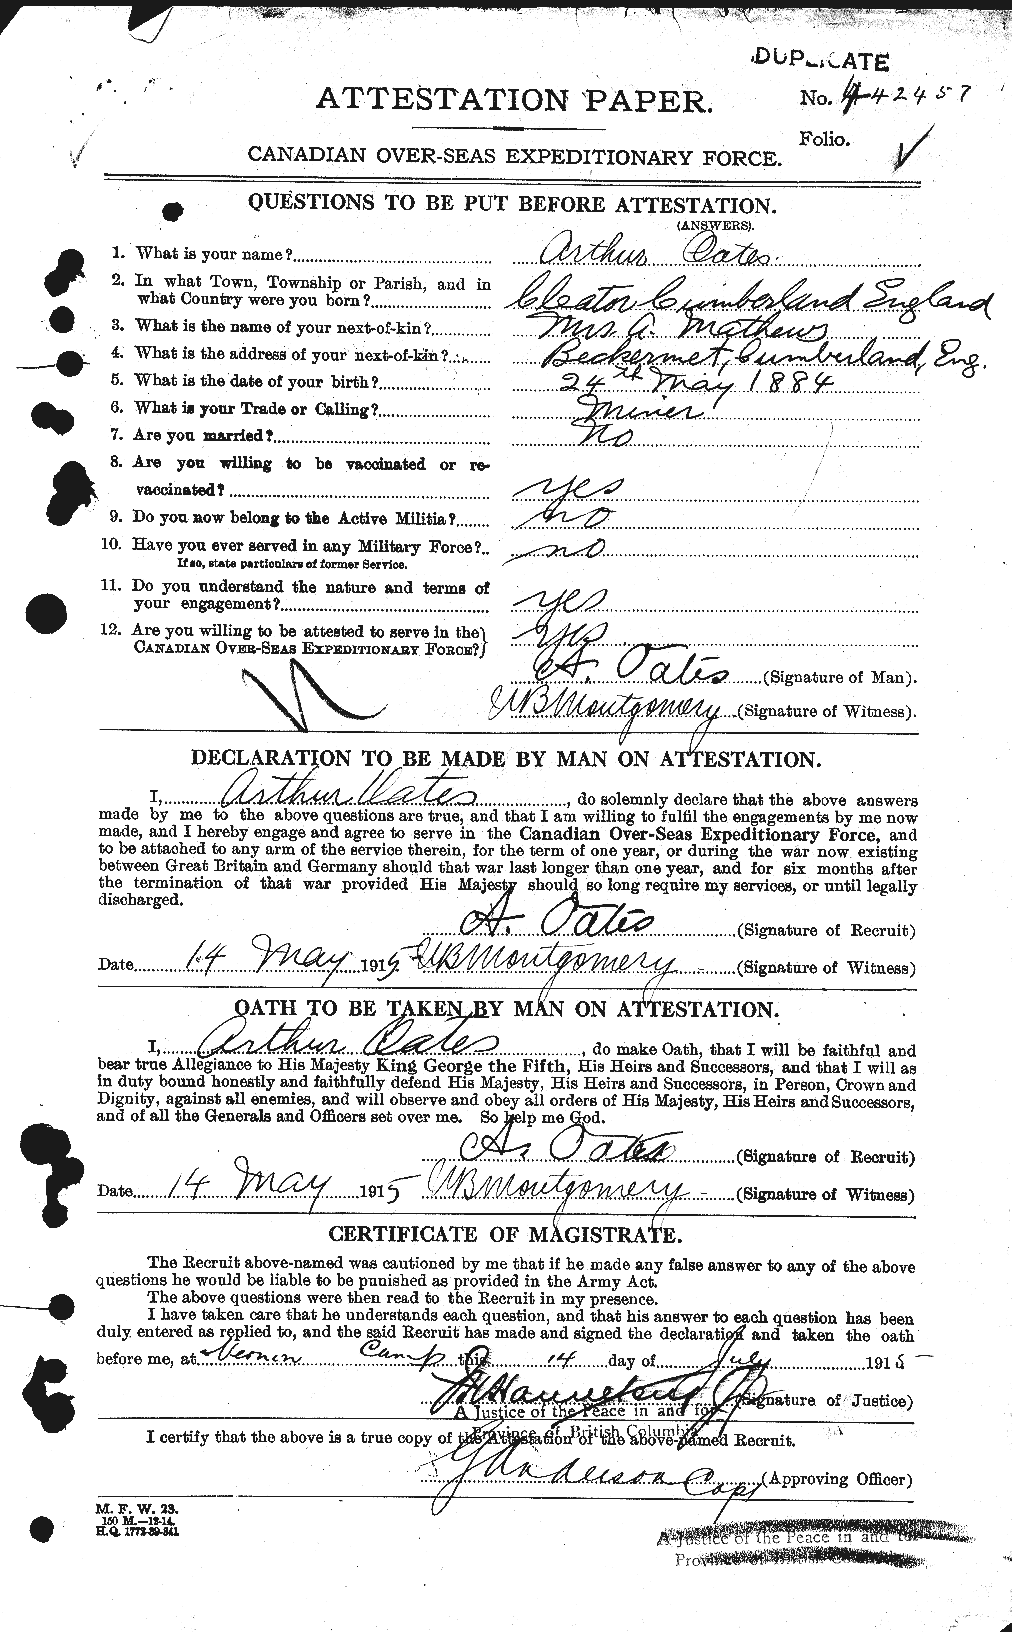 Personnel Records of the First World War - CEF 552534a